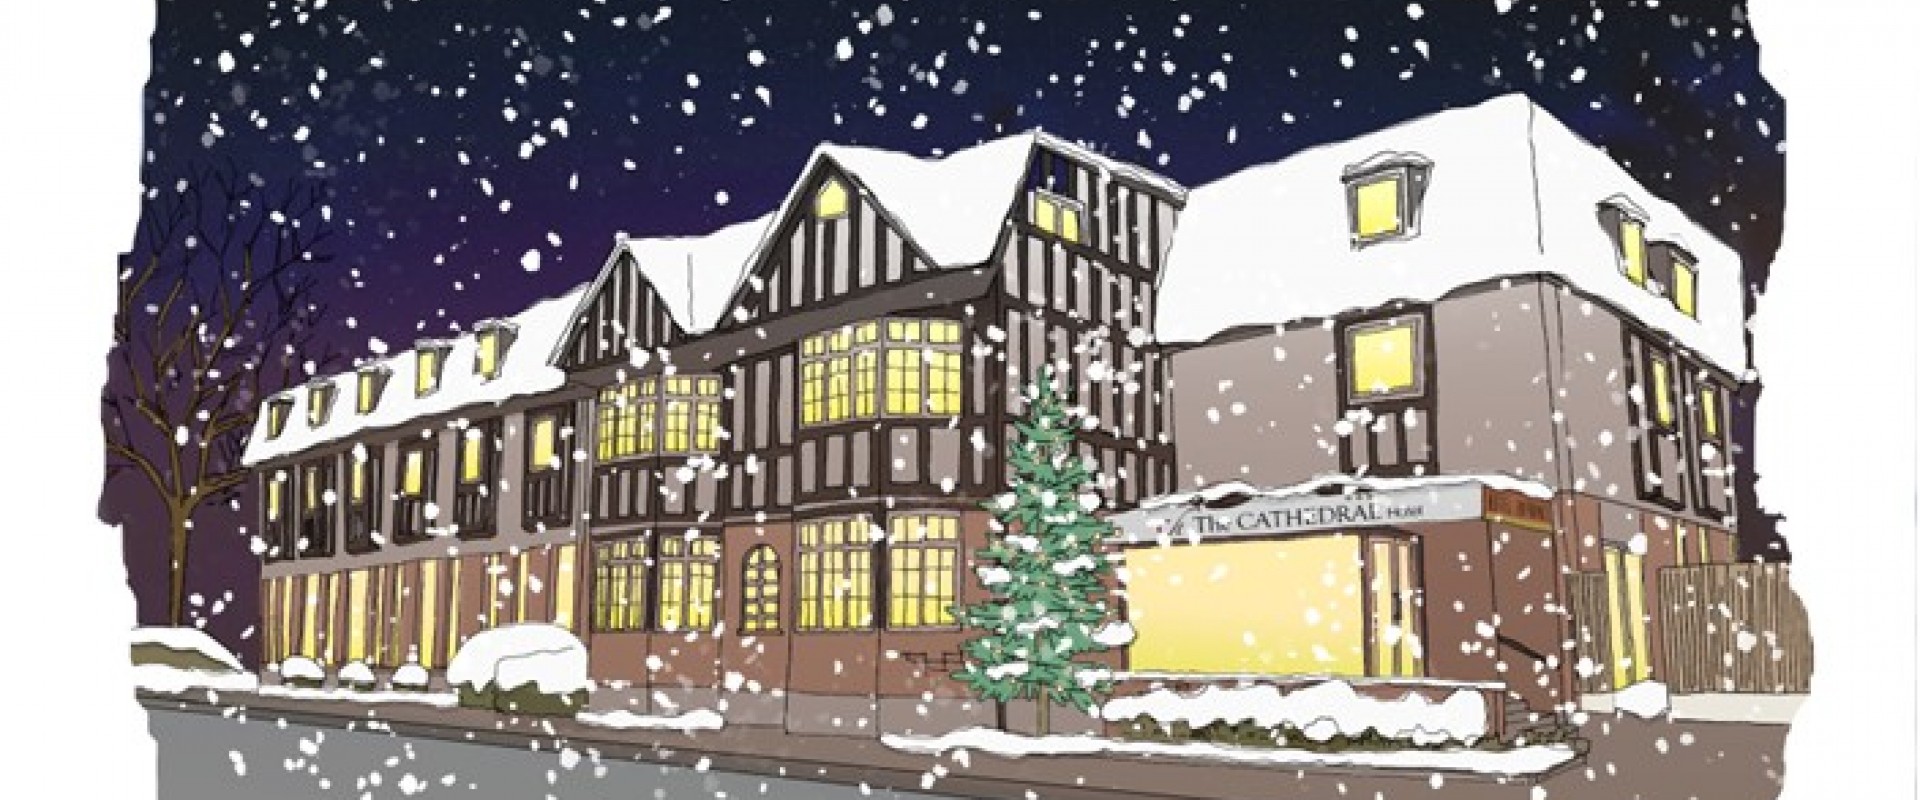 The Cathedral Hotel Christmas Illustration Cropped